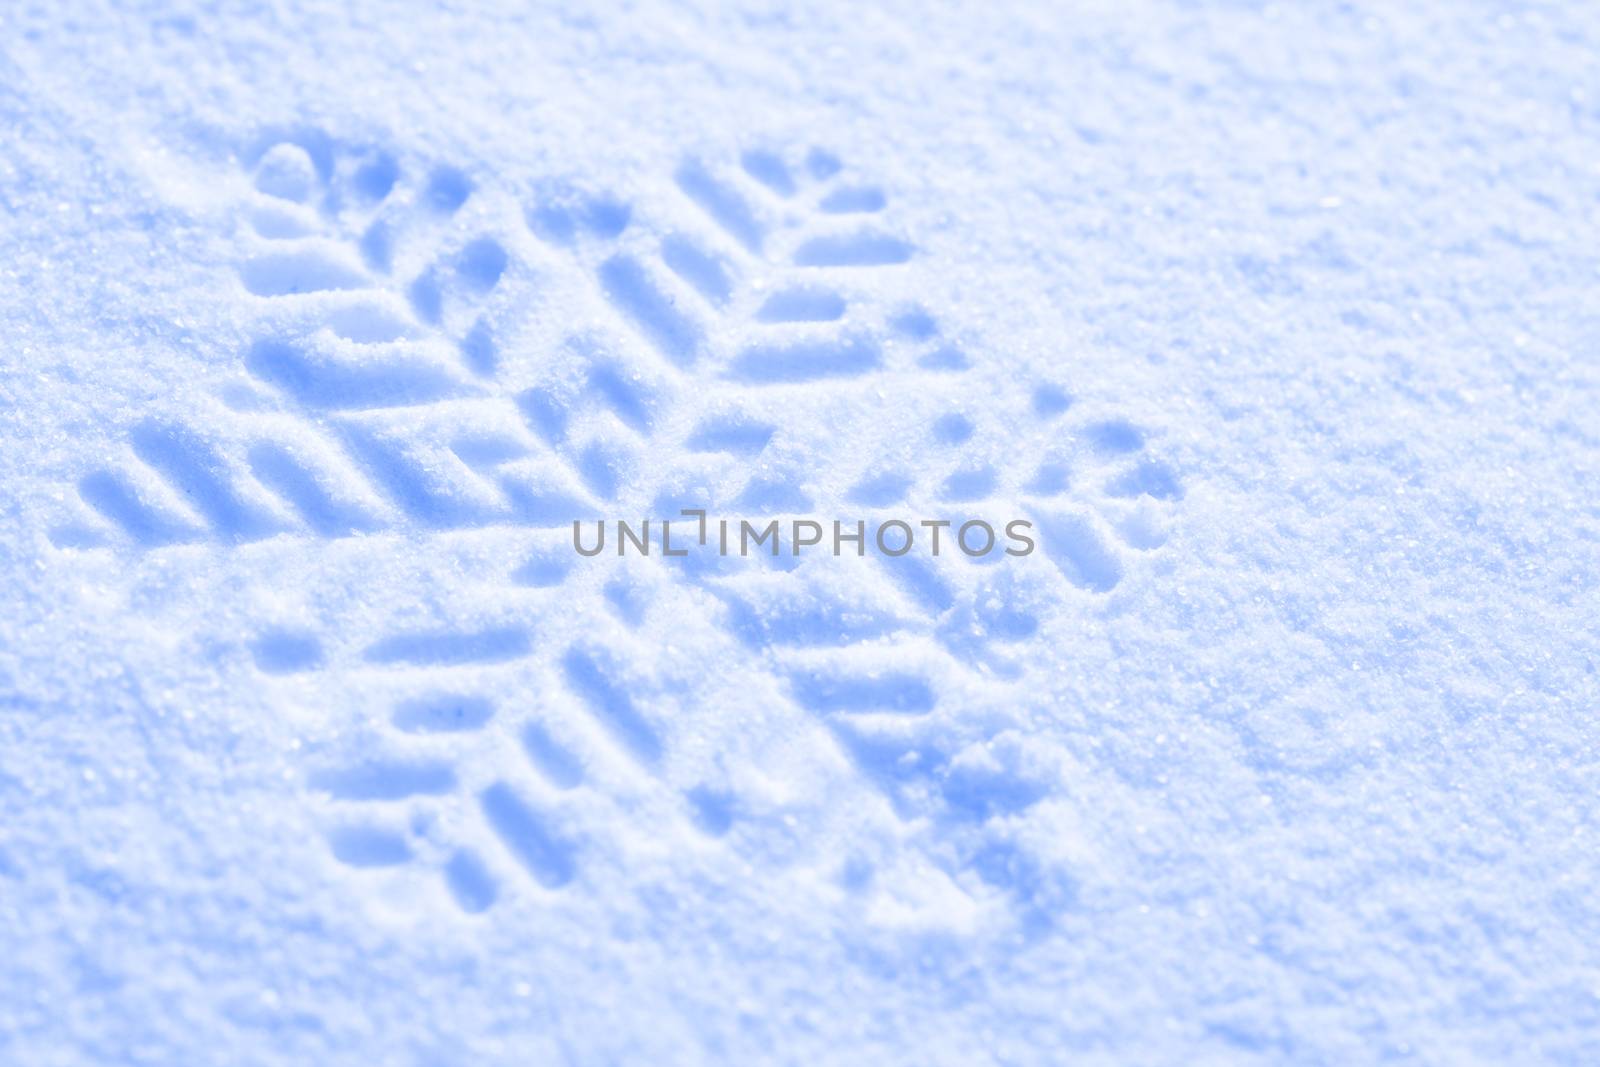 snowflake against a background of snow by anelina